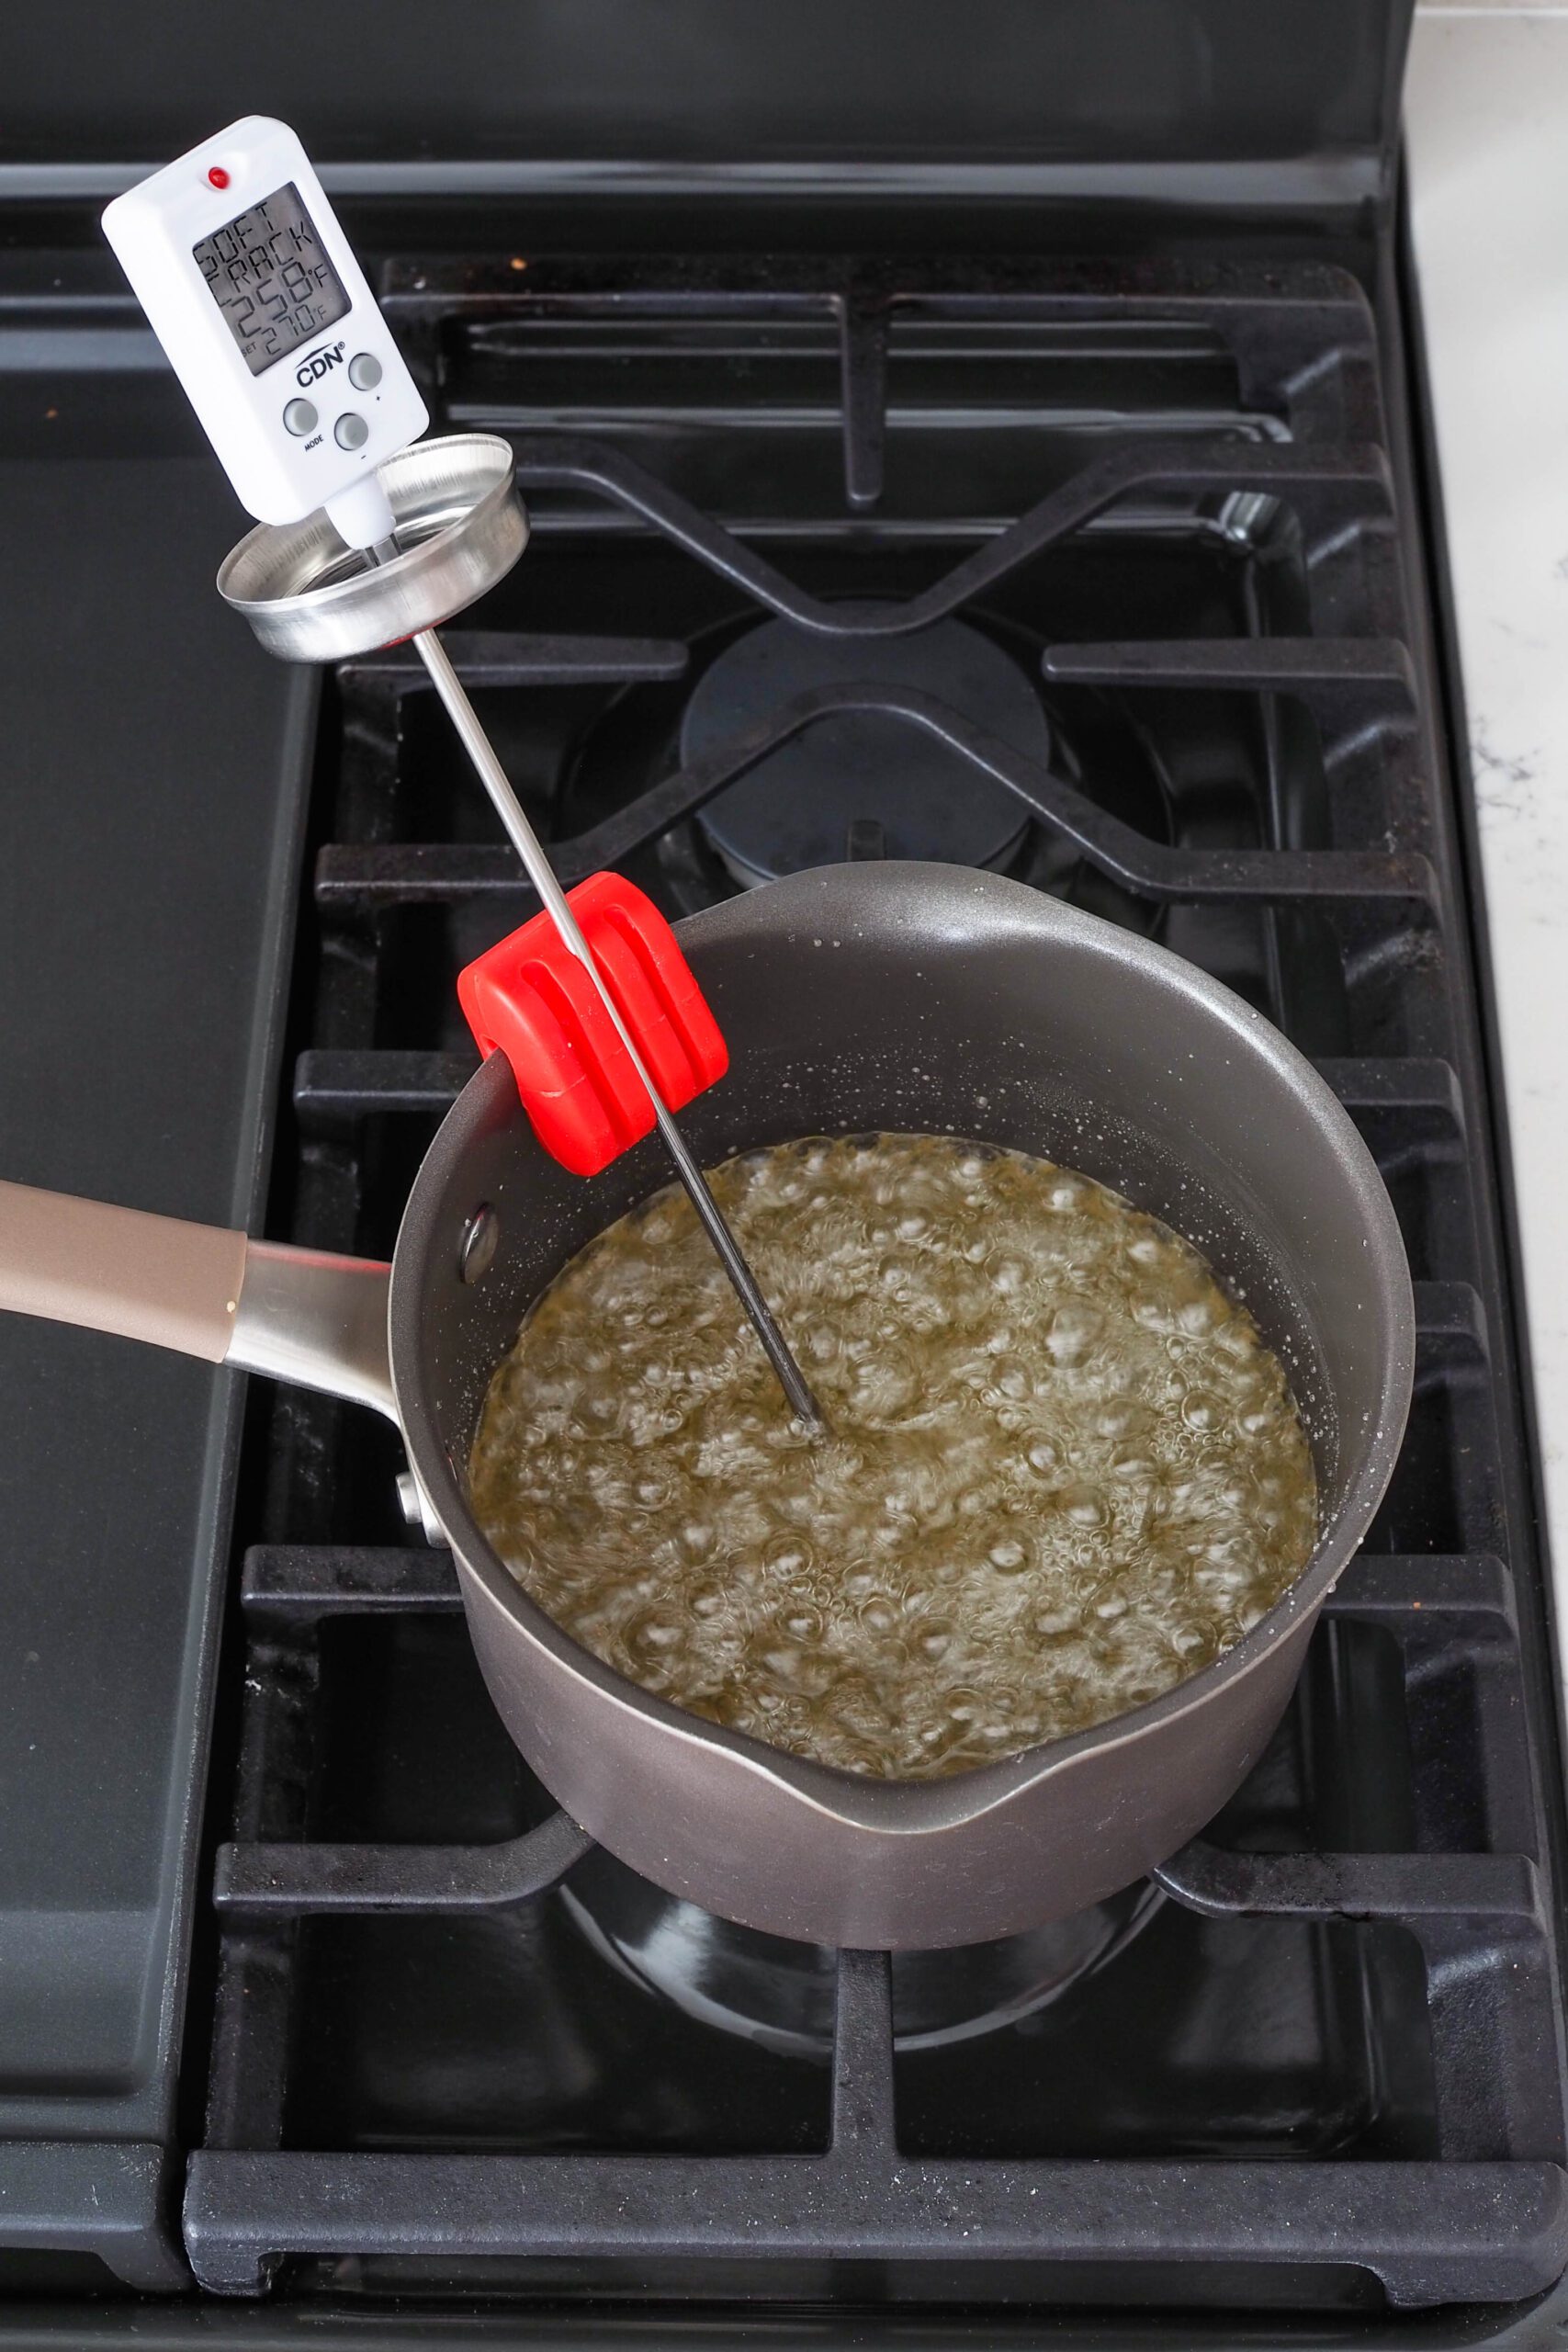 Hot sugar syrup in a pan over a burner with a digital candy thermometer.